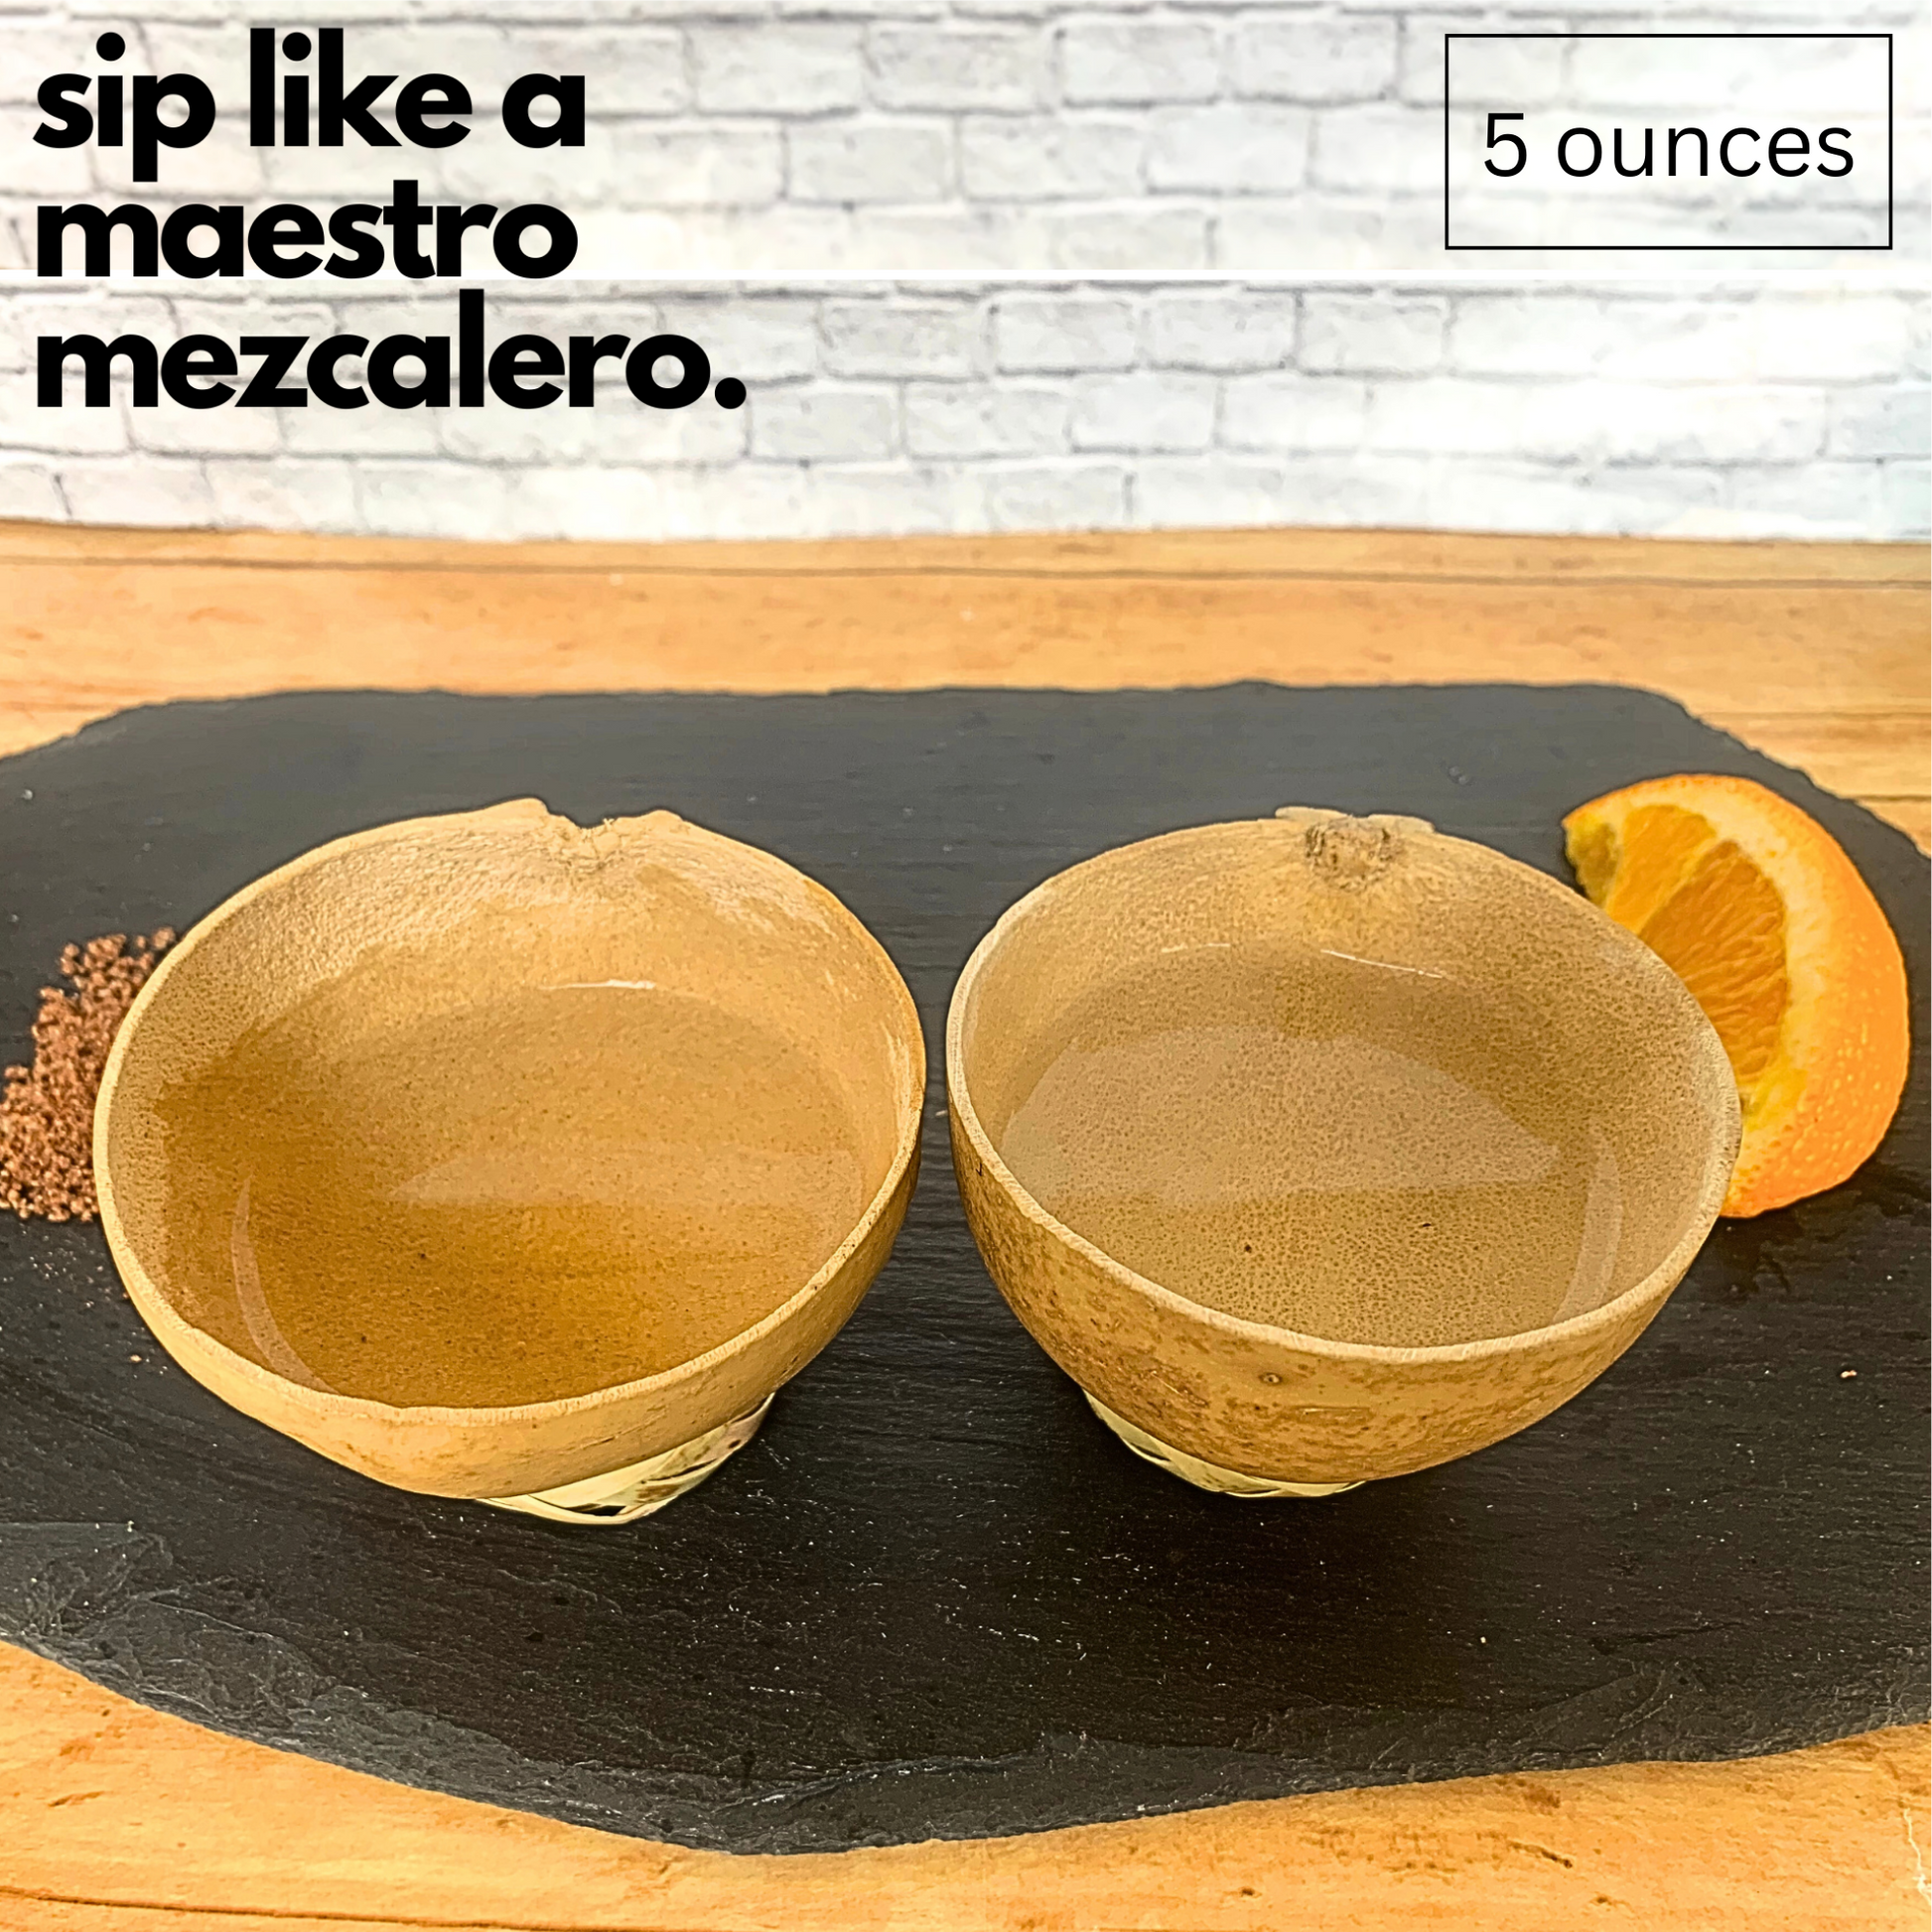 Handmade 5oz Mezcal Jicaras Cups from Mexico, perfect for enjoying agave spirits in a traditional manner, supporting sustainability. fill with mezcal